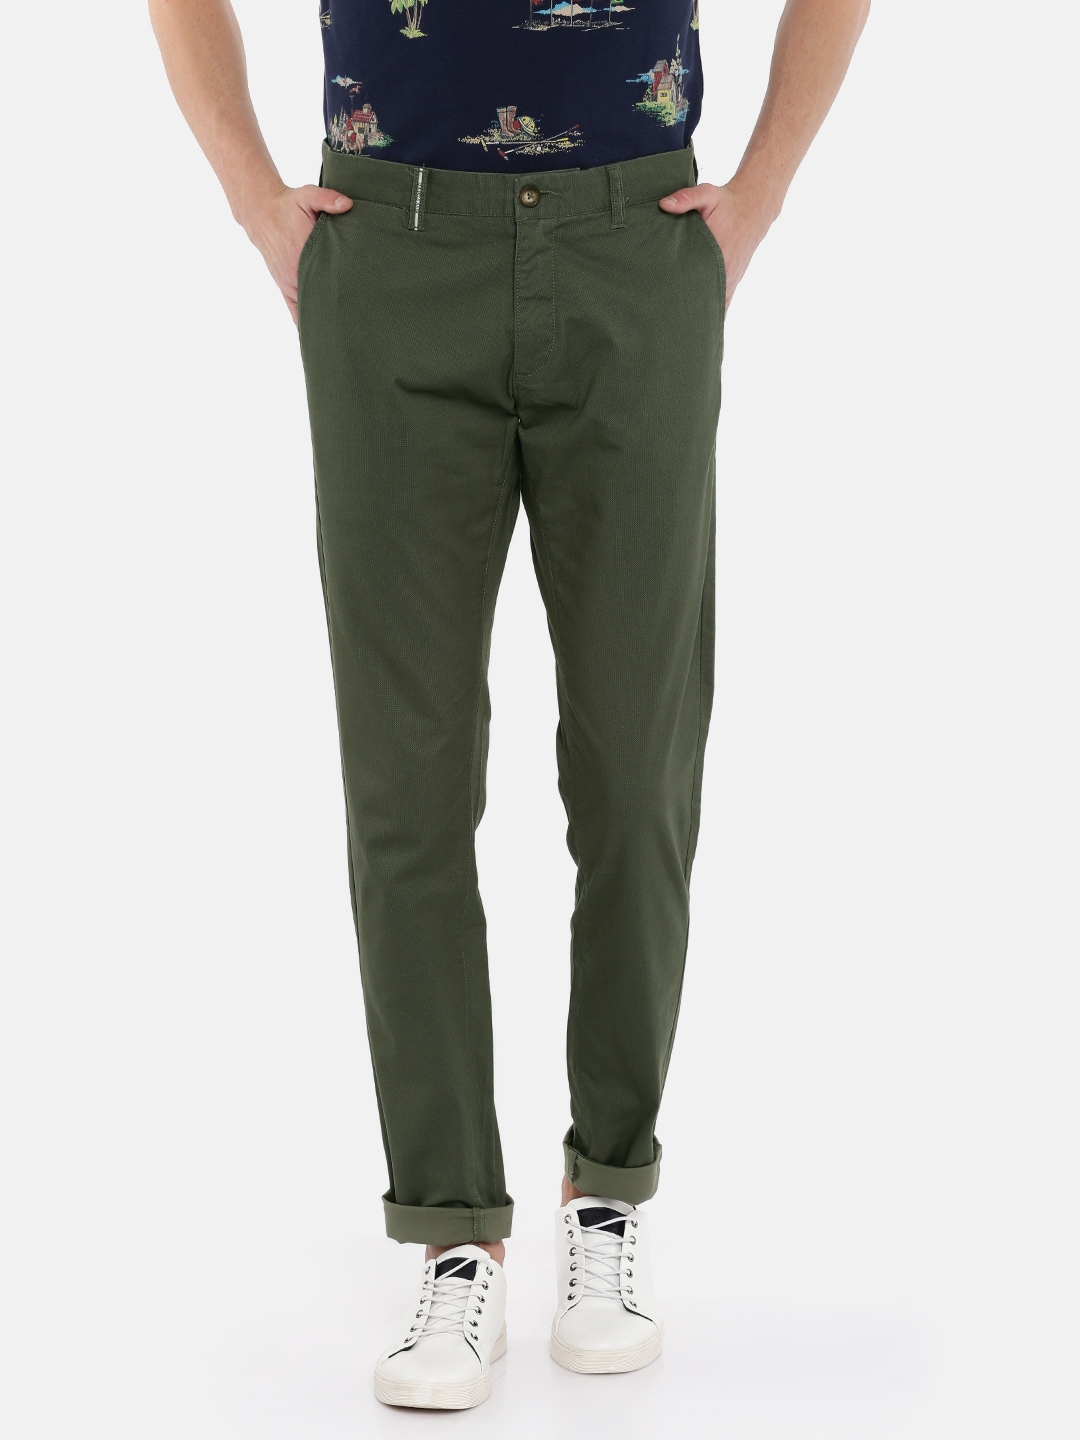 Buy U.S. Polo Assn. Men Olive Green Slim Fit Printed Chinos - Trousers ...